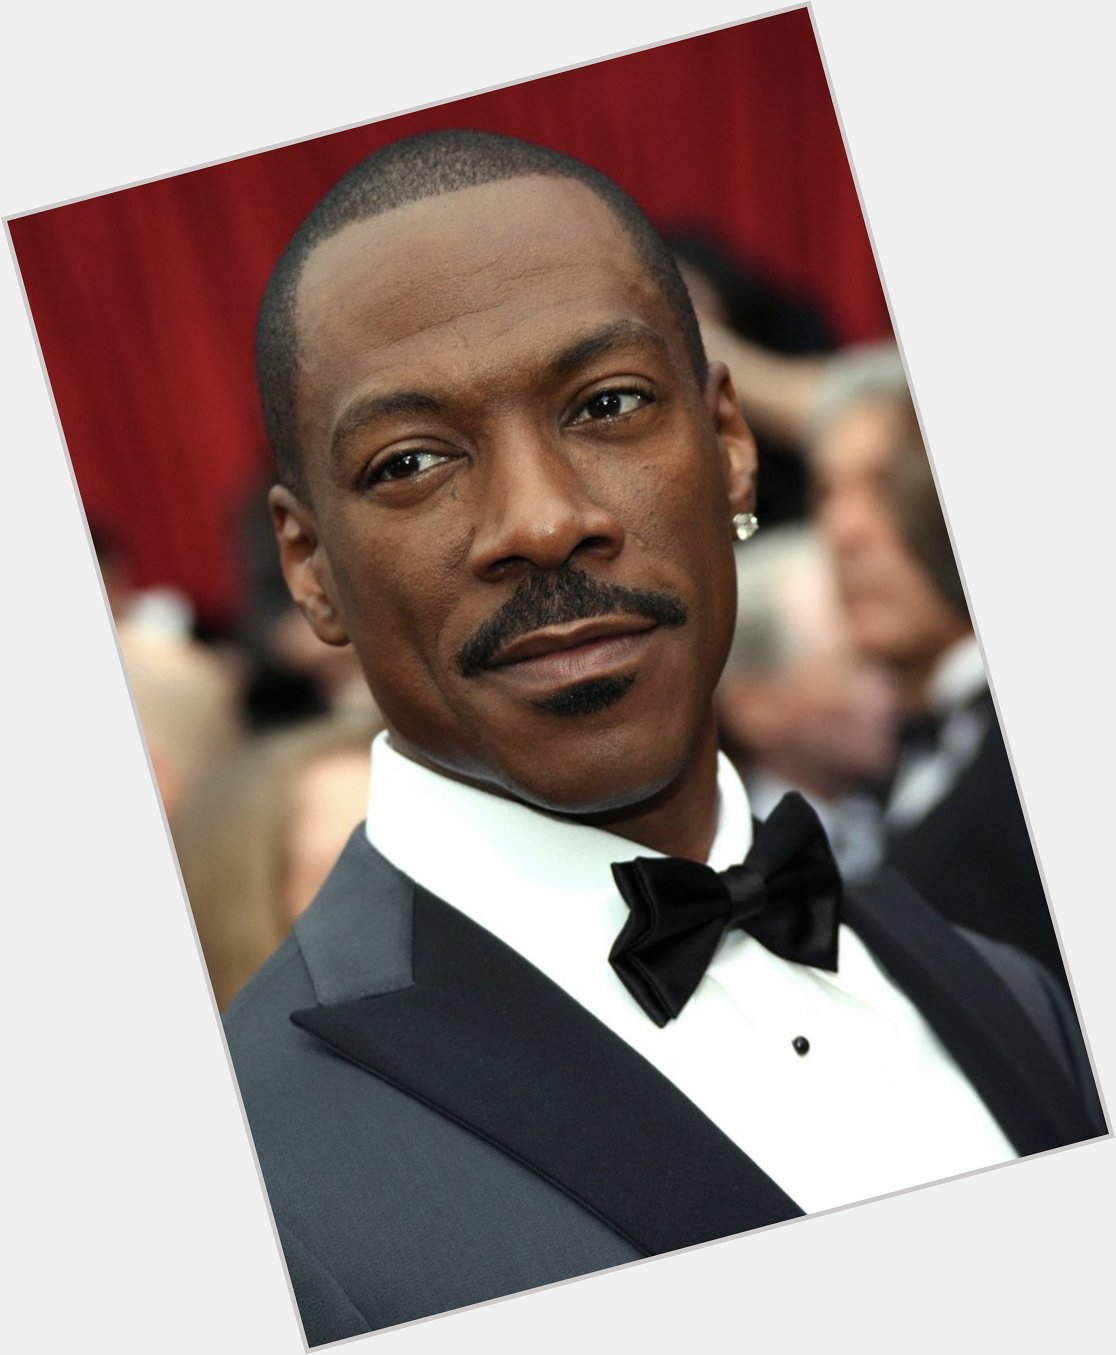 Happy 60th birthday, Eddie Murphy. Please tell me your skincare routine, you make 60 look amazing 